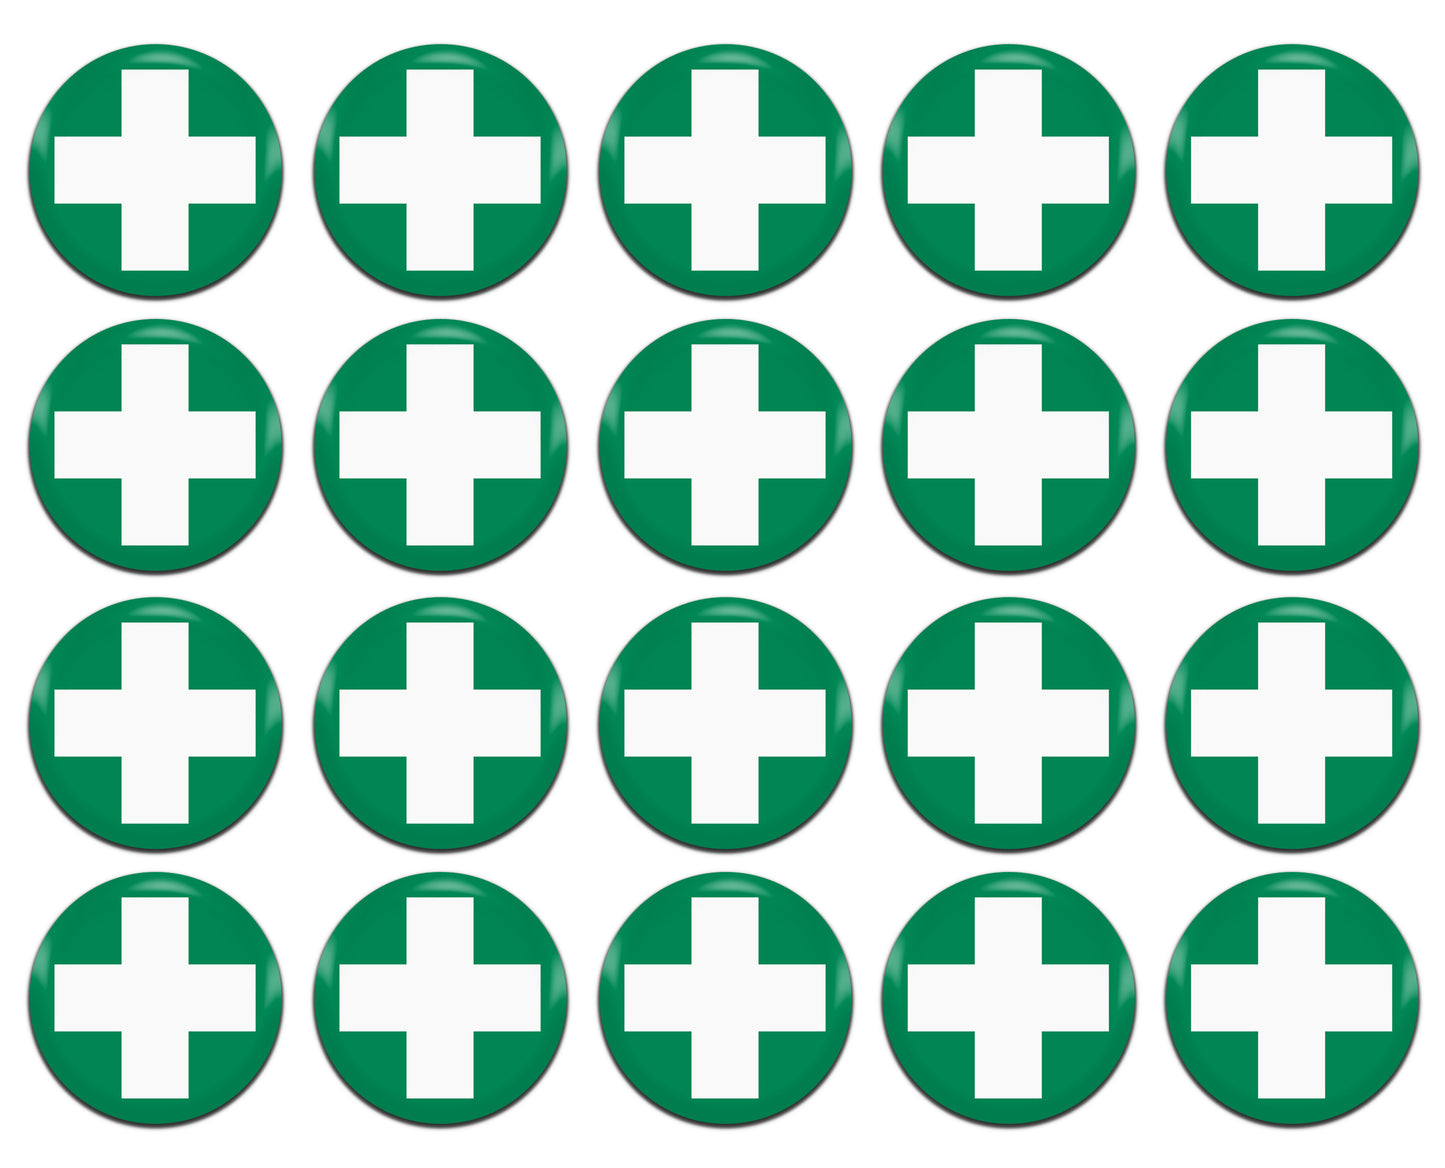 First Aid 25mm / 1 Inch D-Pin Button Badges (20x Set)